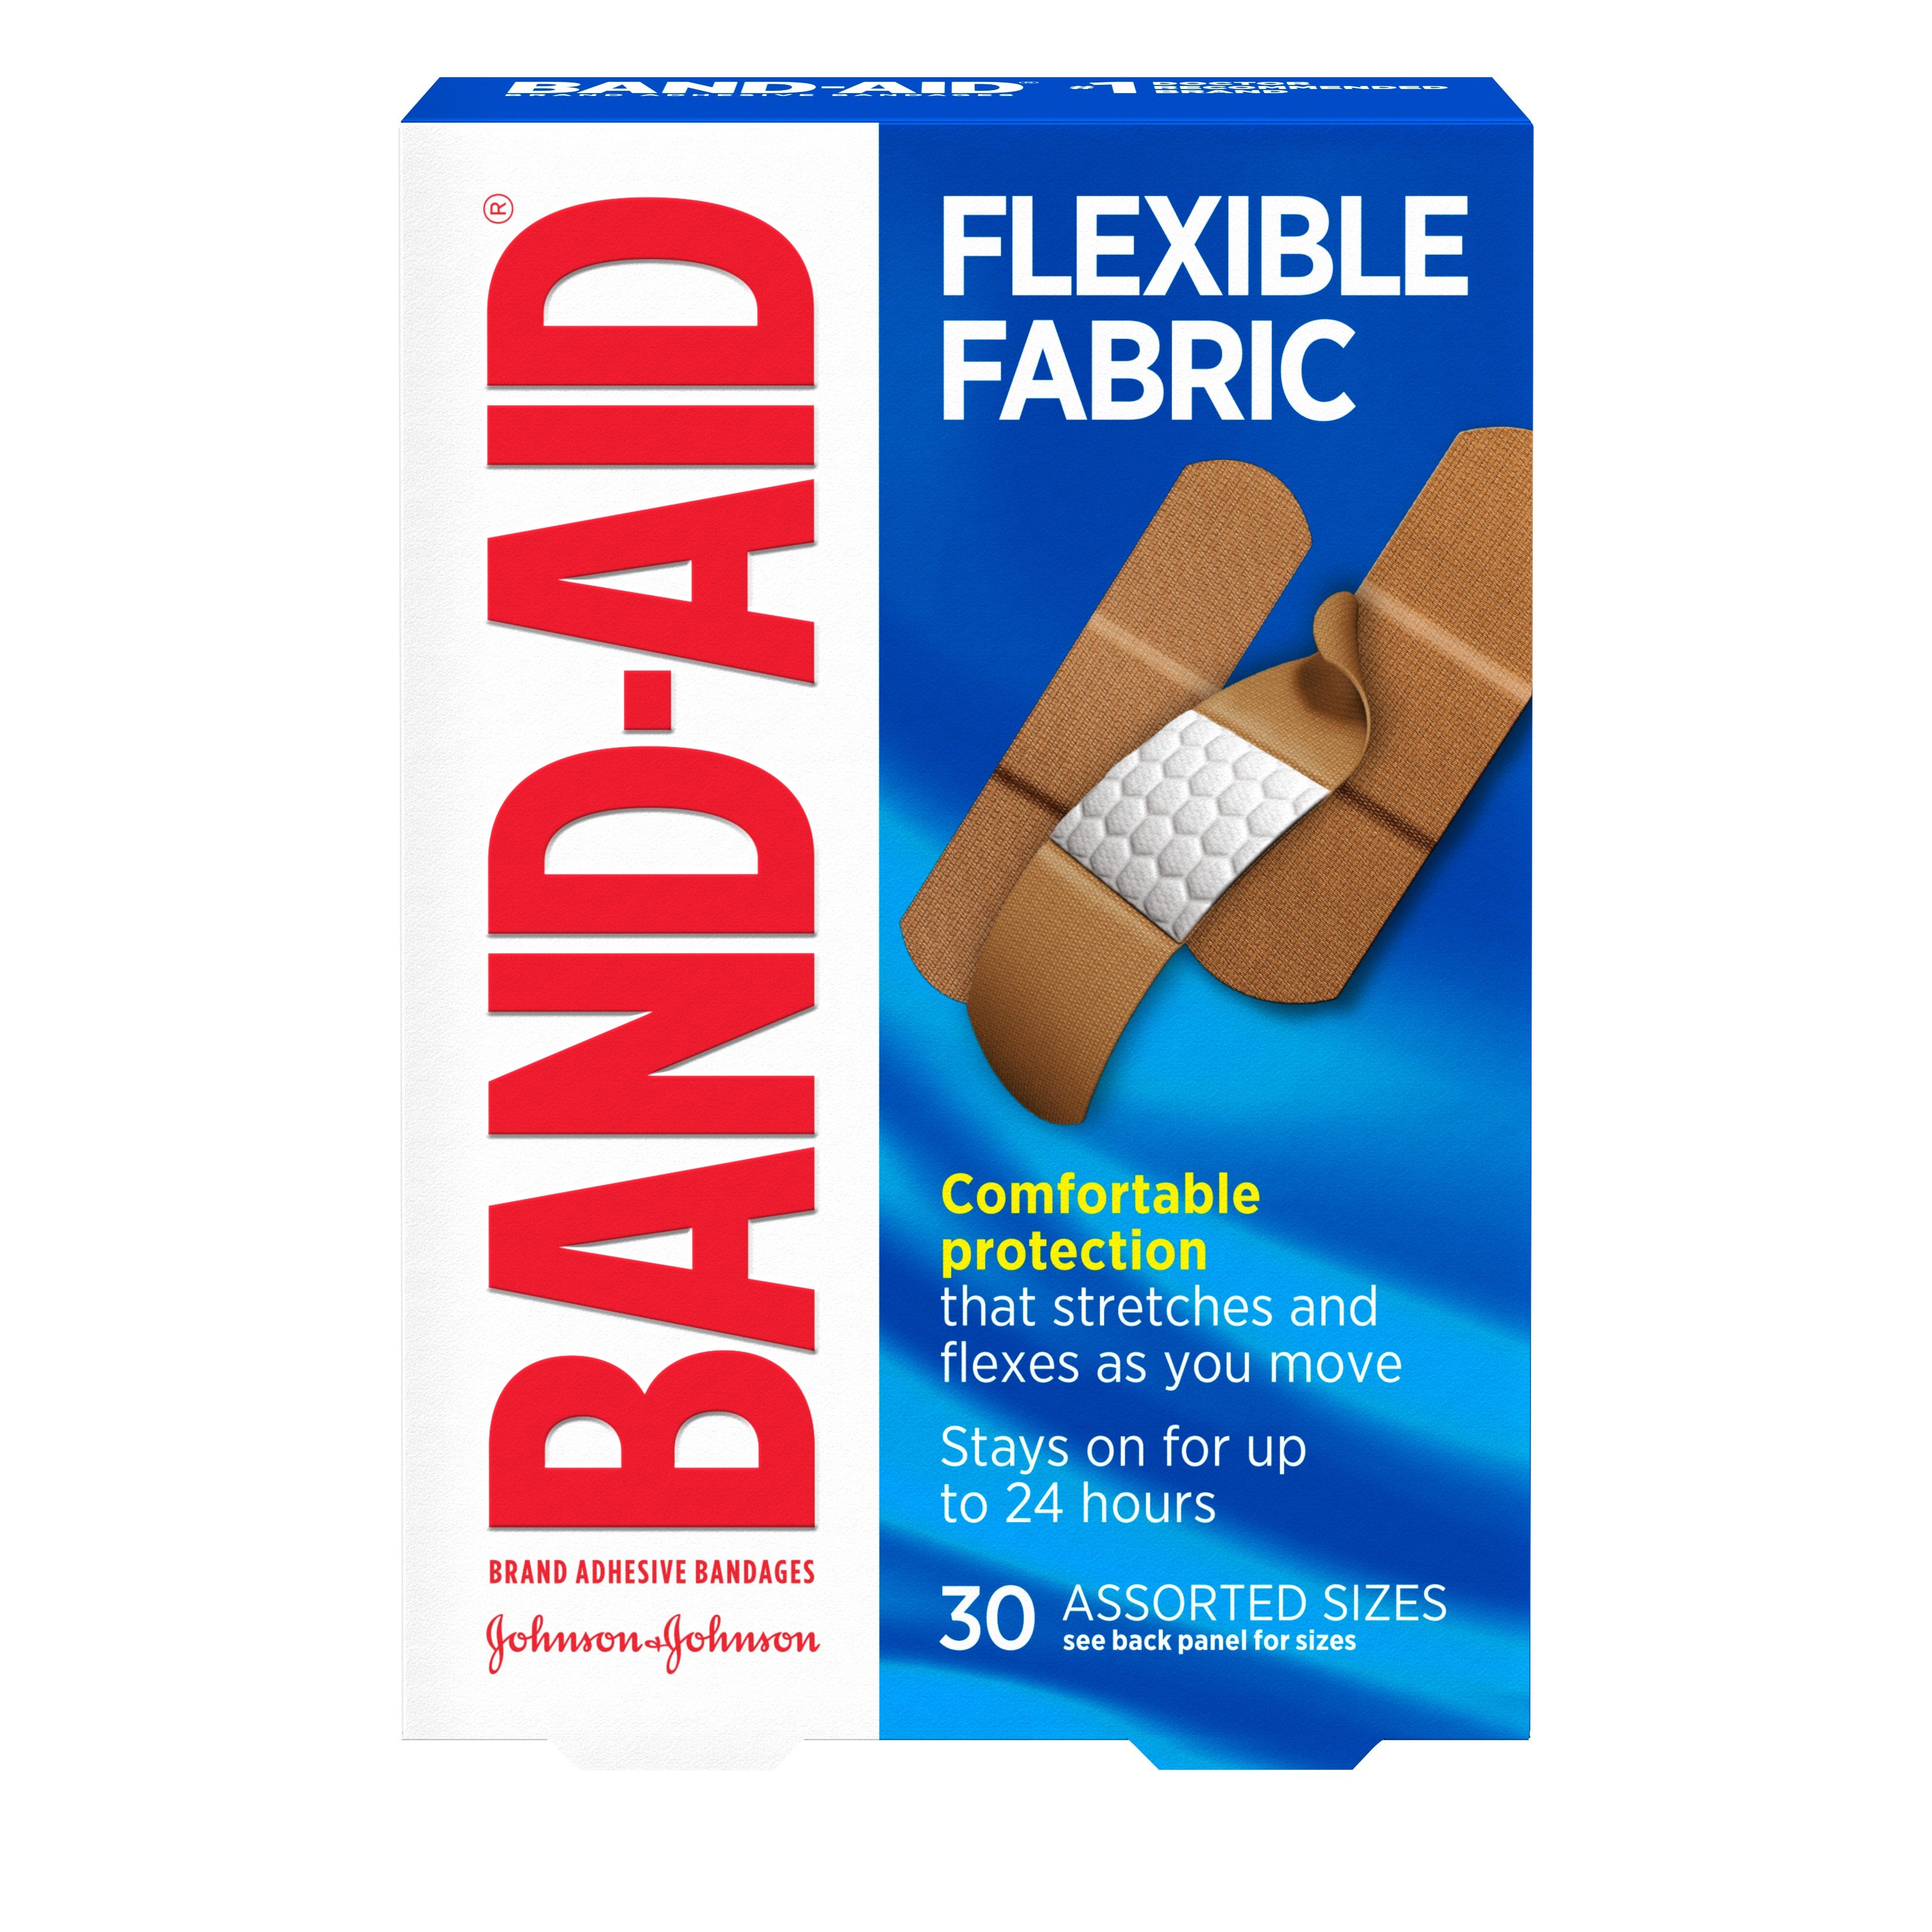  Band-Aid Brand Ourtone Flexible Fabric Adhesive Bandages,  Flexible Protection & Care of Minor Cuts & Scrapes, Quilt-Aid Pad for  Painful Wounds, BR55, Assorted Sizes, 30 Count : Health & Household